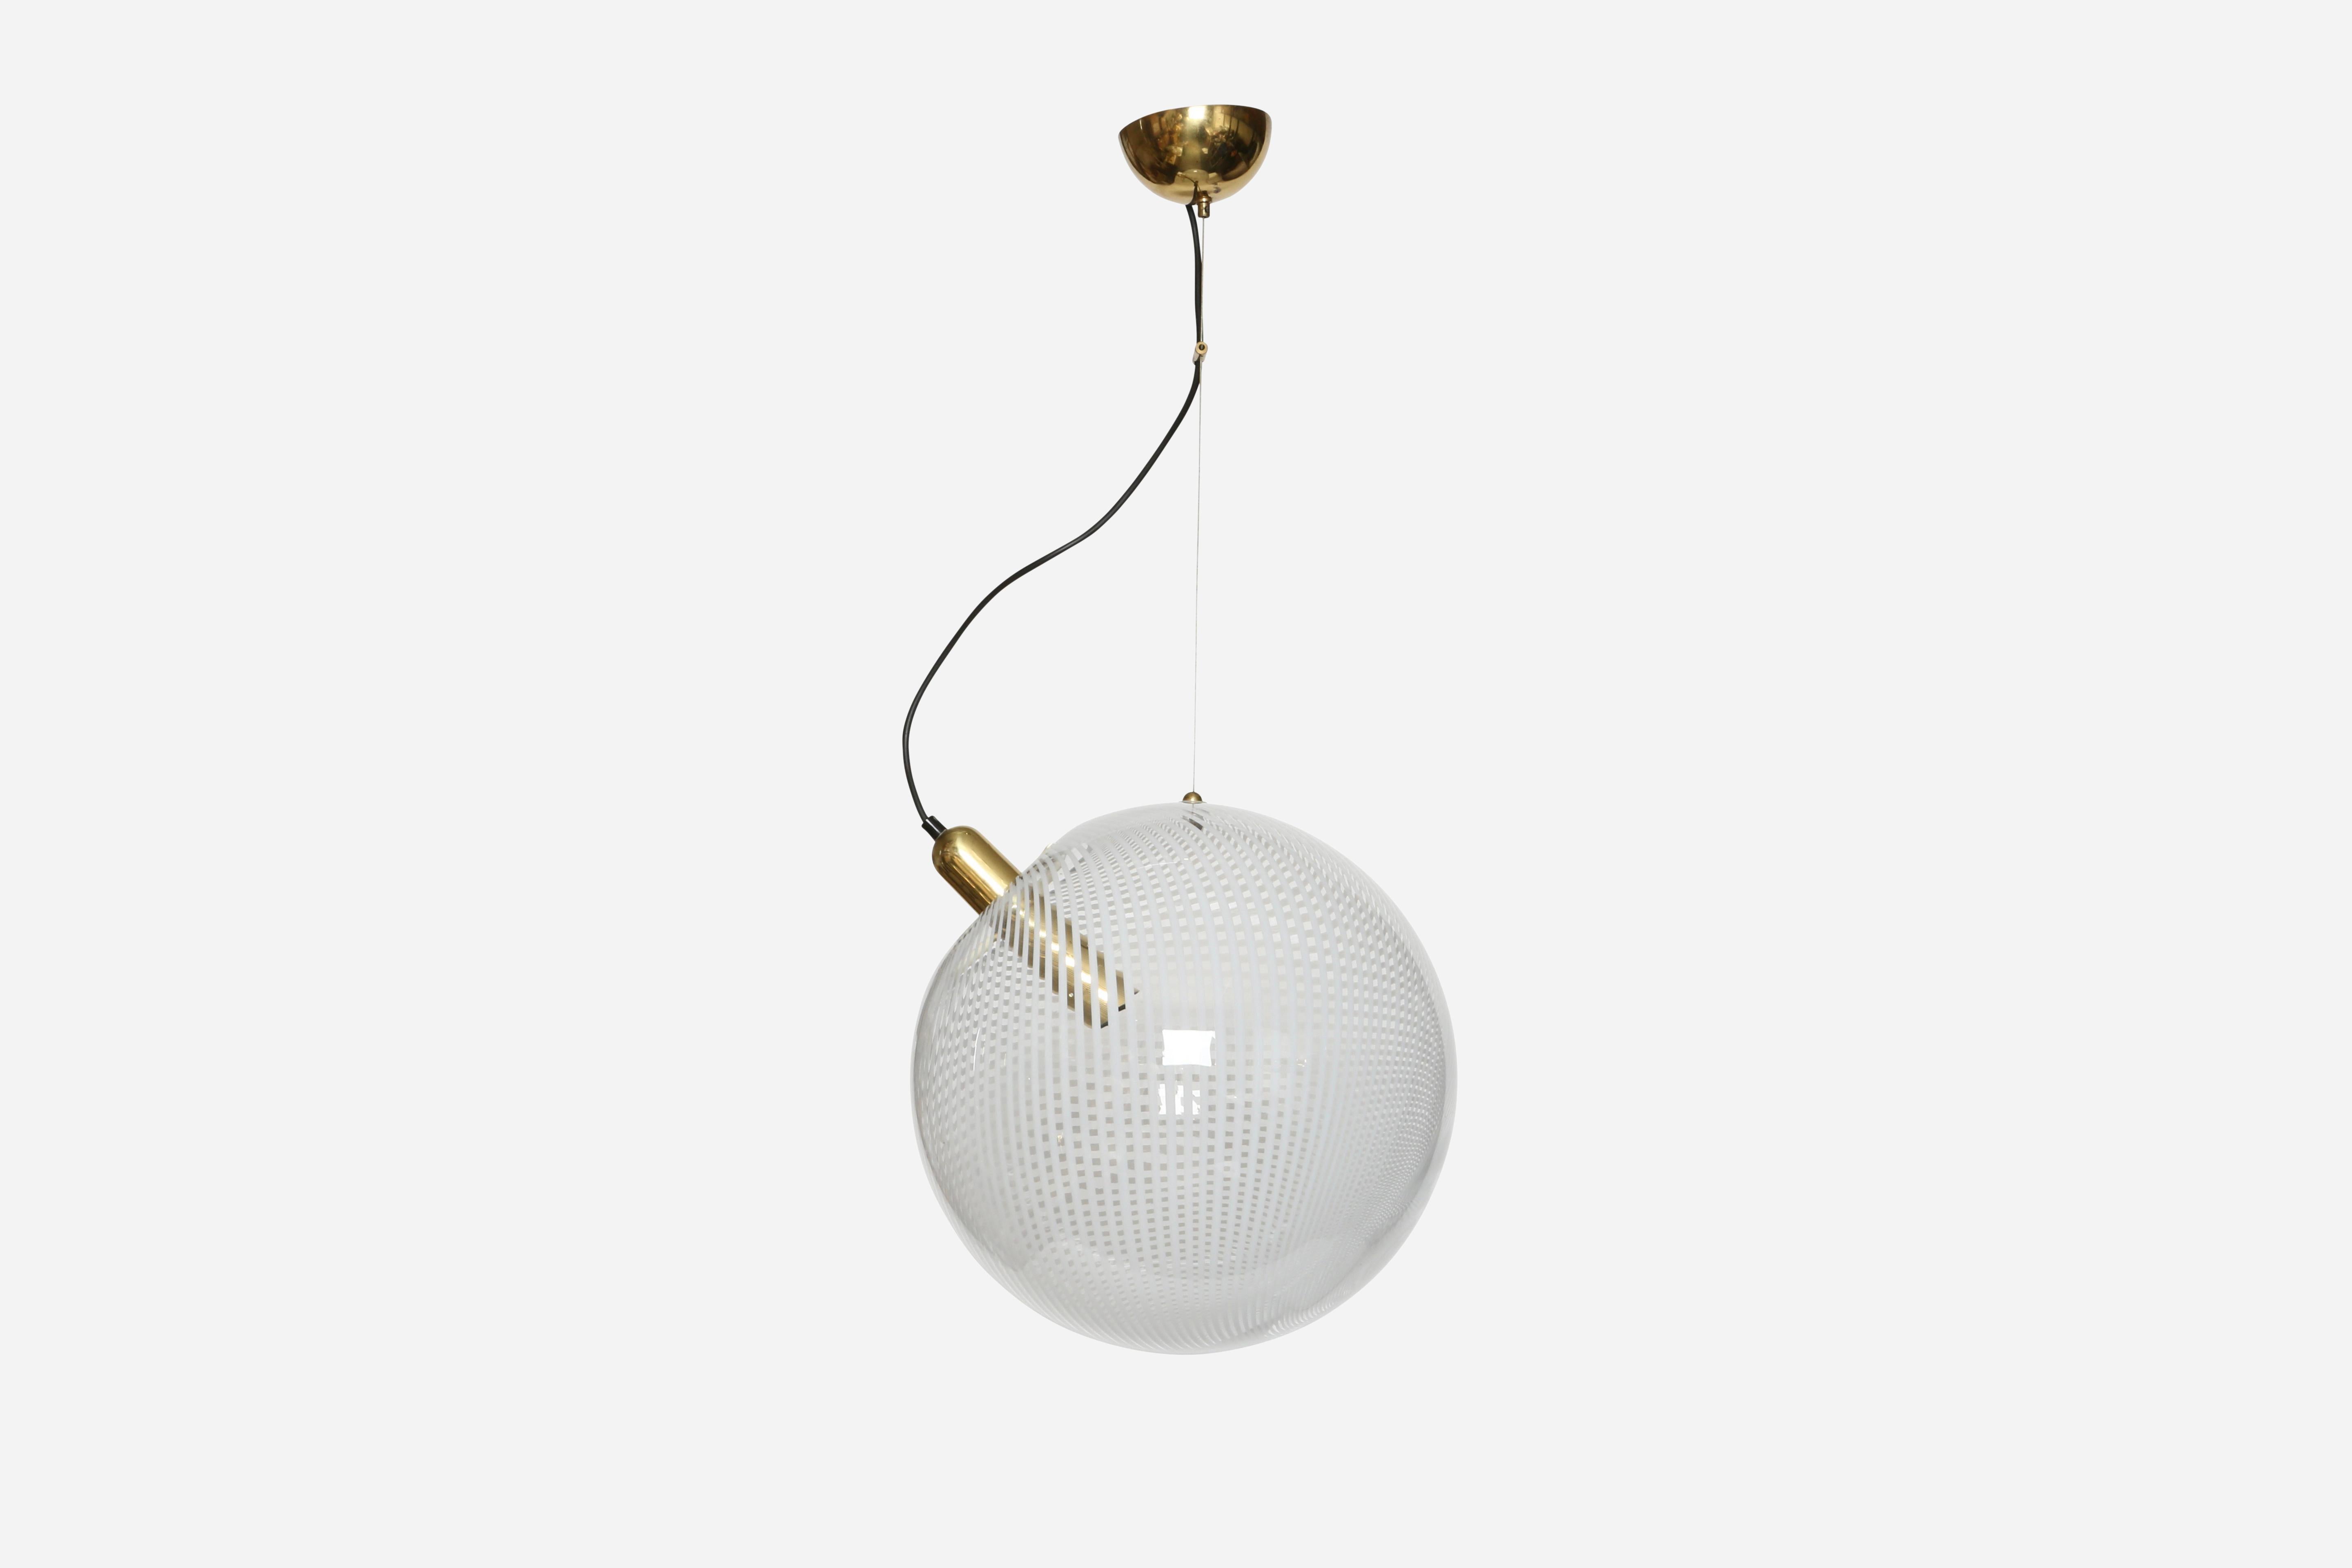 Venini ceiling pendant by Ludovico Diaz De Santillana.
Designed and manufactured in Italy in 1970s.
Reticello glass, brass and plastic glass holder.
Overall drop is adjustable, can be made shorter or longer.
Takes one medium base